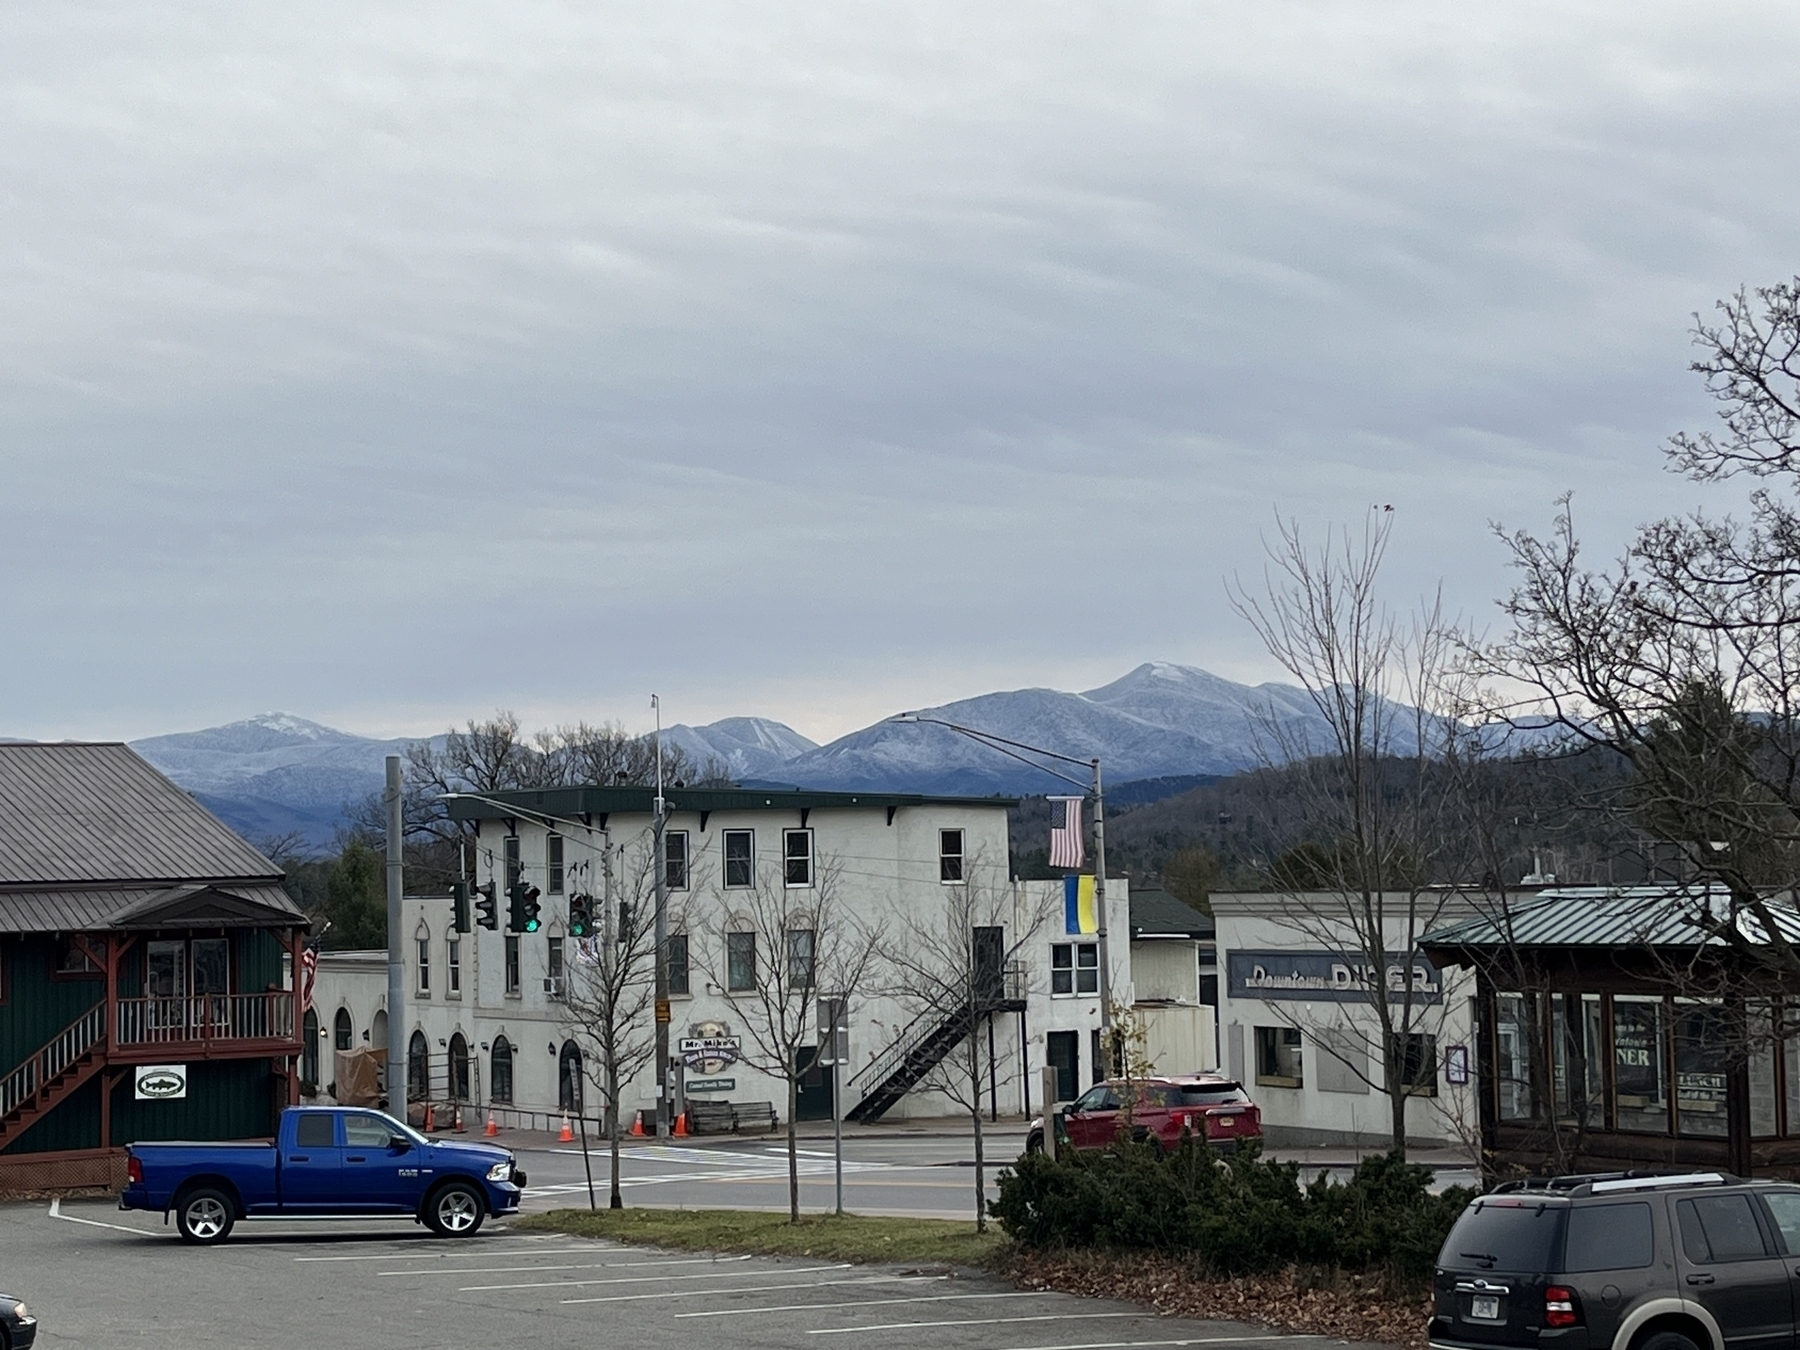 A mountain topped with a layer of snow in the background behind a local main street.